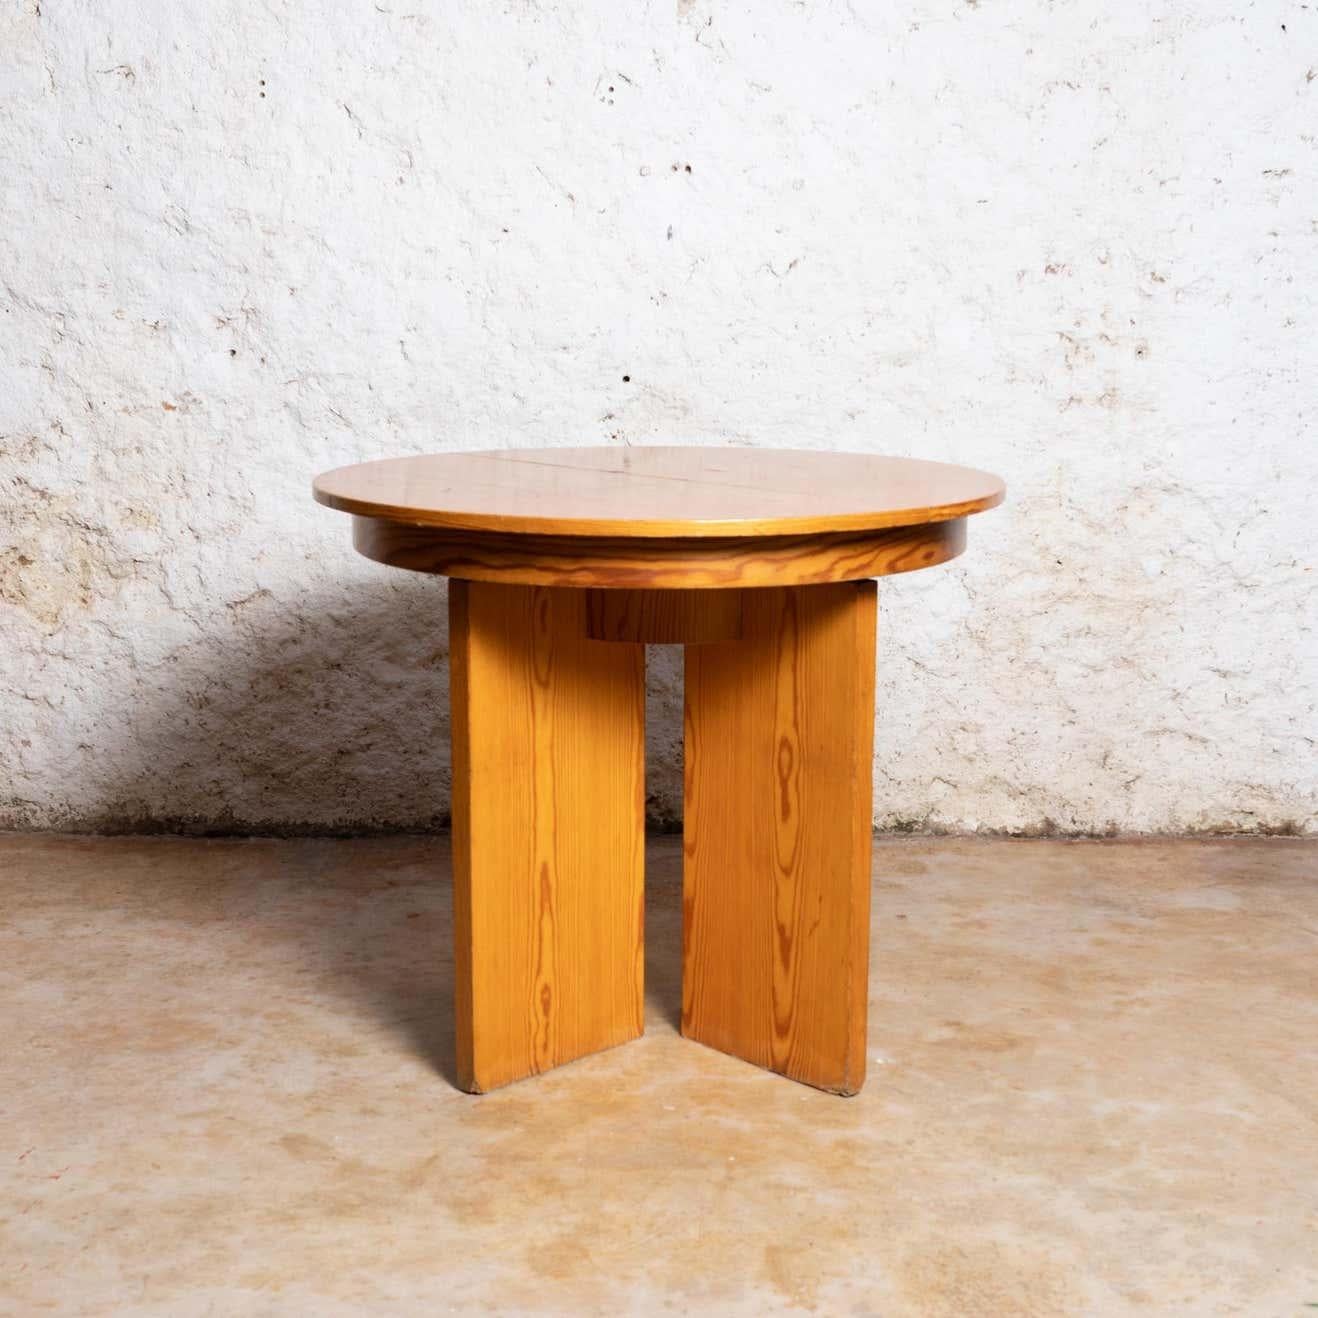 Extensible table designed by Jordi Vilanova, circa 1960.

In original condition, with some visible signs of previous use and age, preserving a beautiful patina.

Measures:
Closed: Ø 90 H 76
Open: D 90 W 125 H 76

Materials:
Wood.


